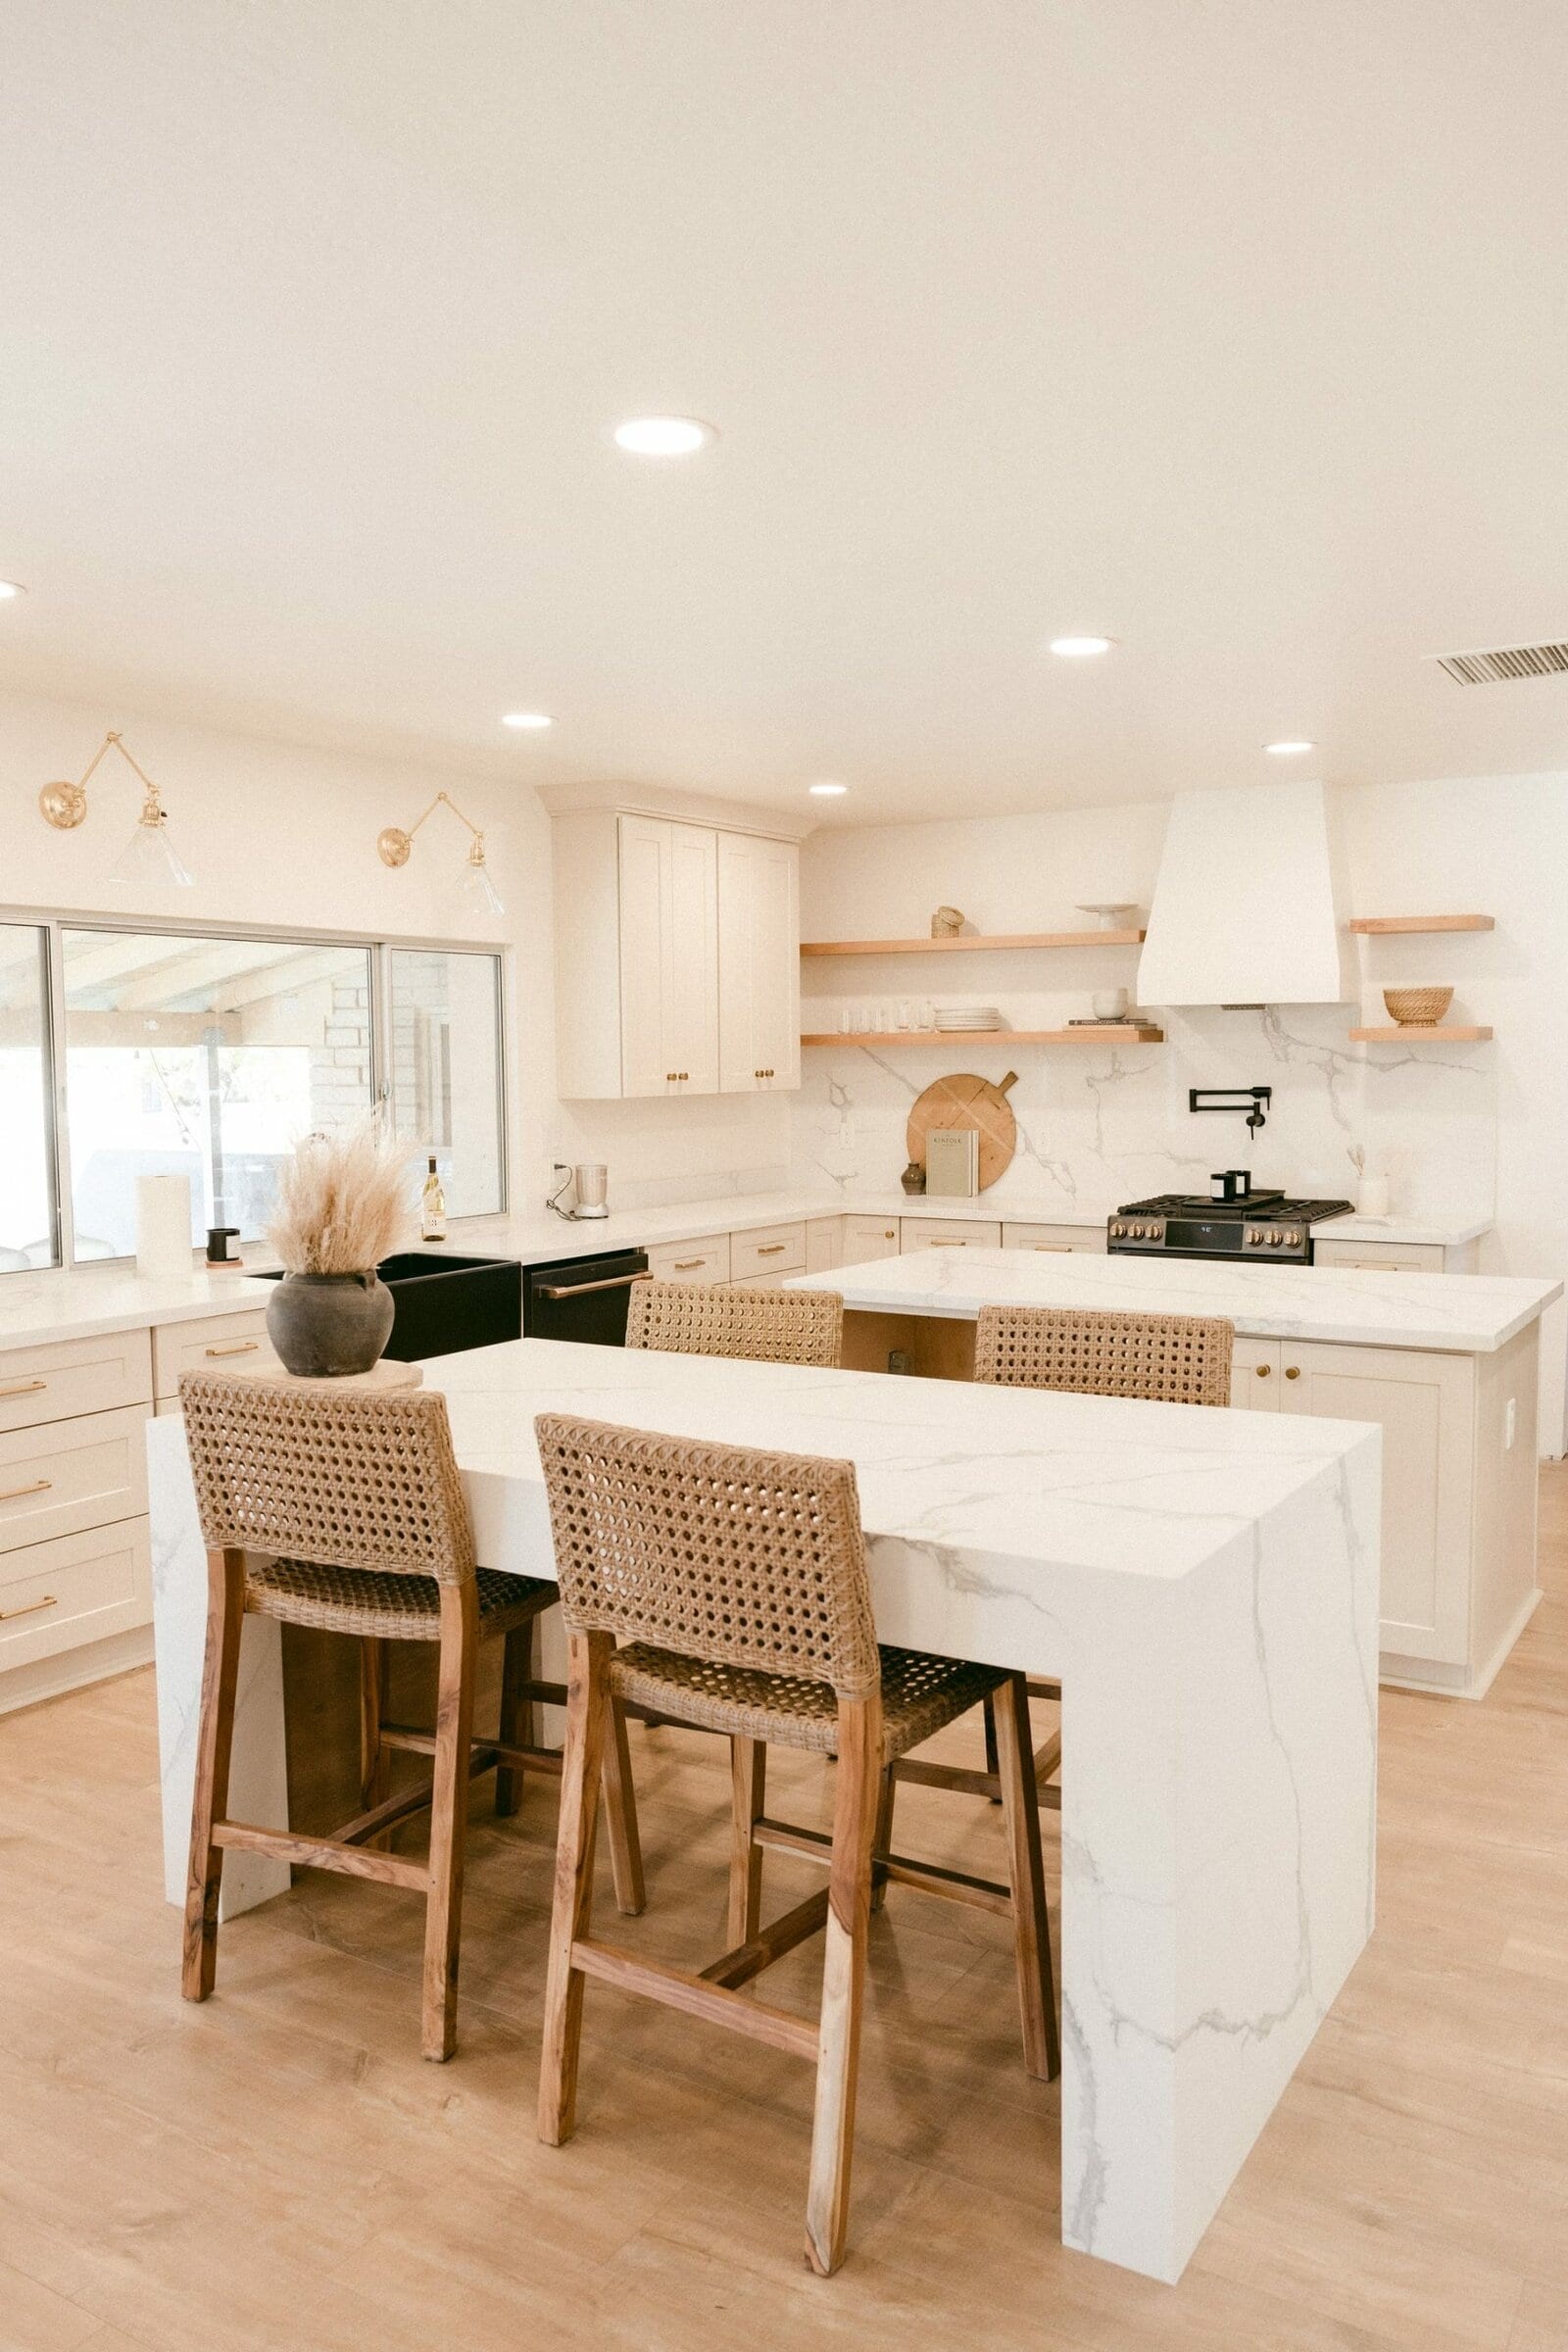 5. Kitchen with Cabinets and Open Shelving scaled